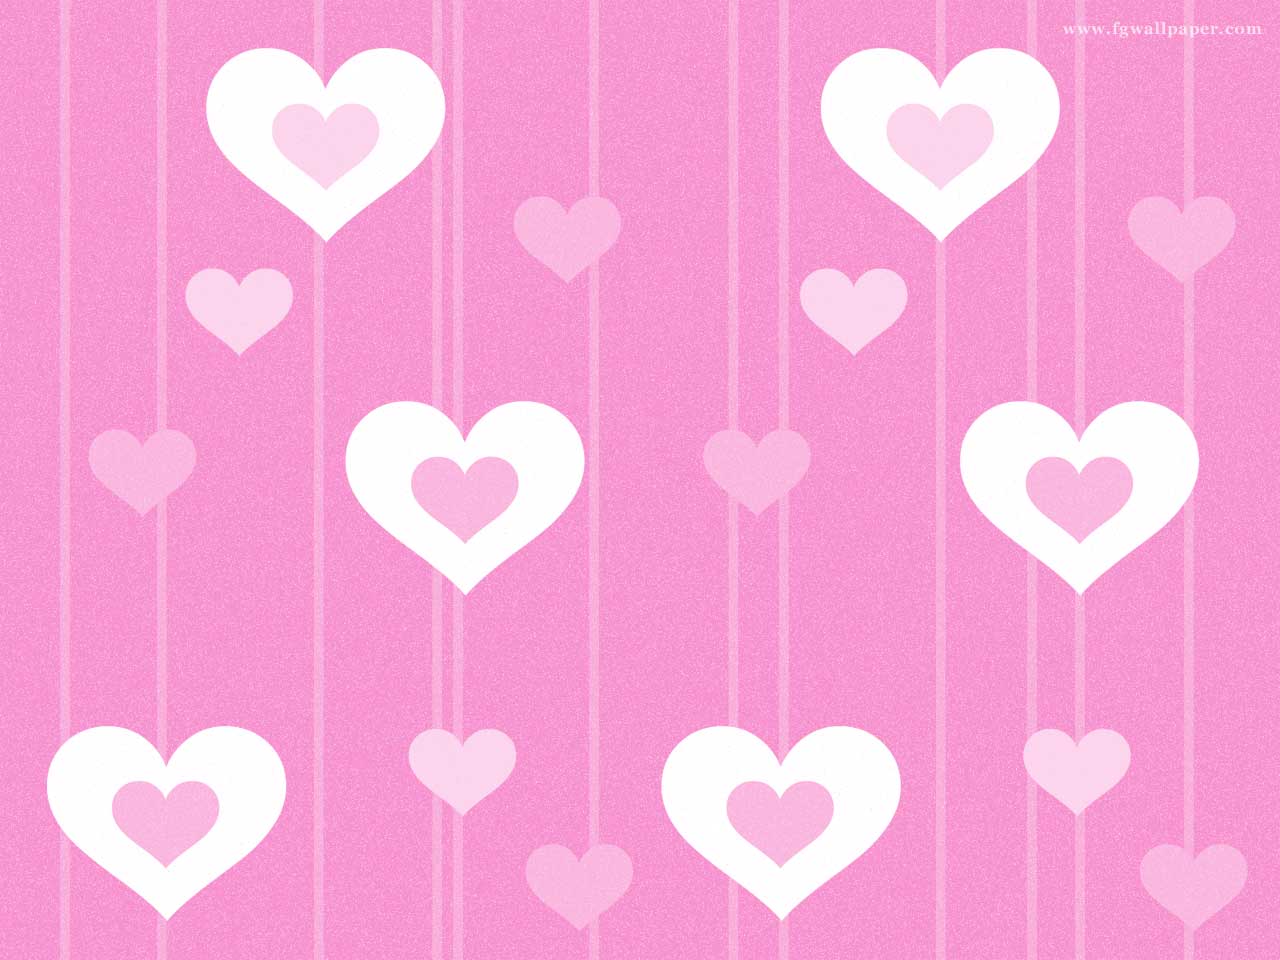 Love Heart Wallpaper and Picture Items